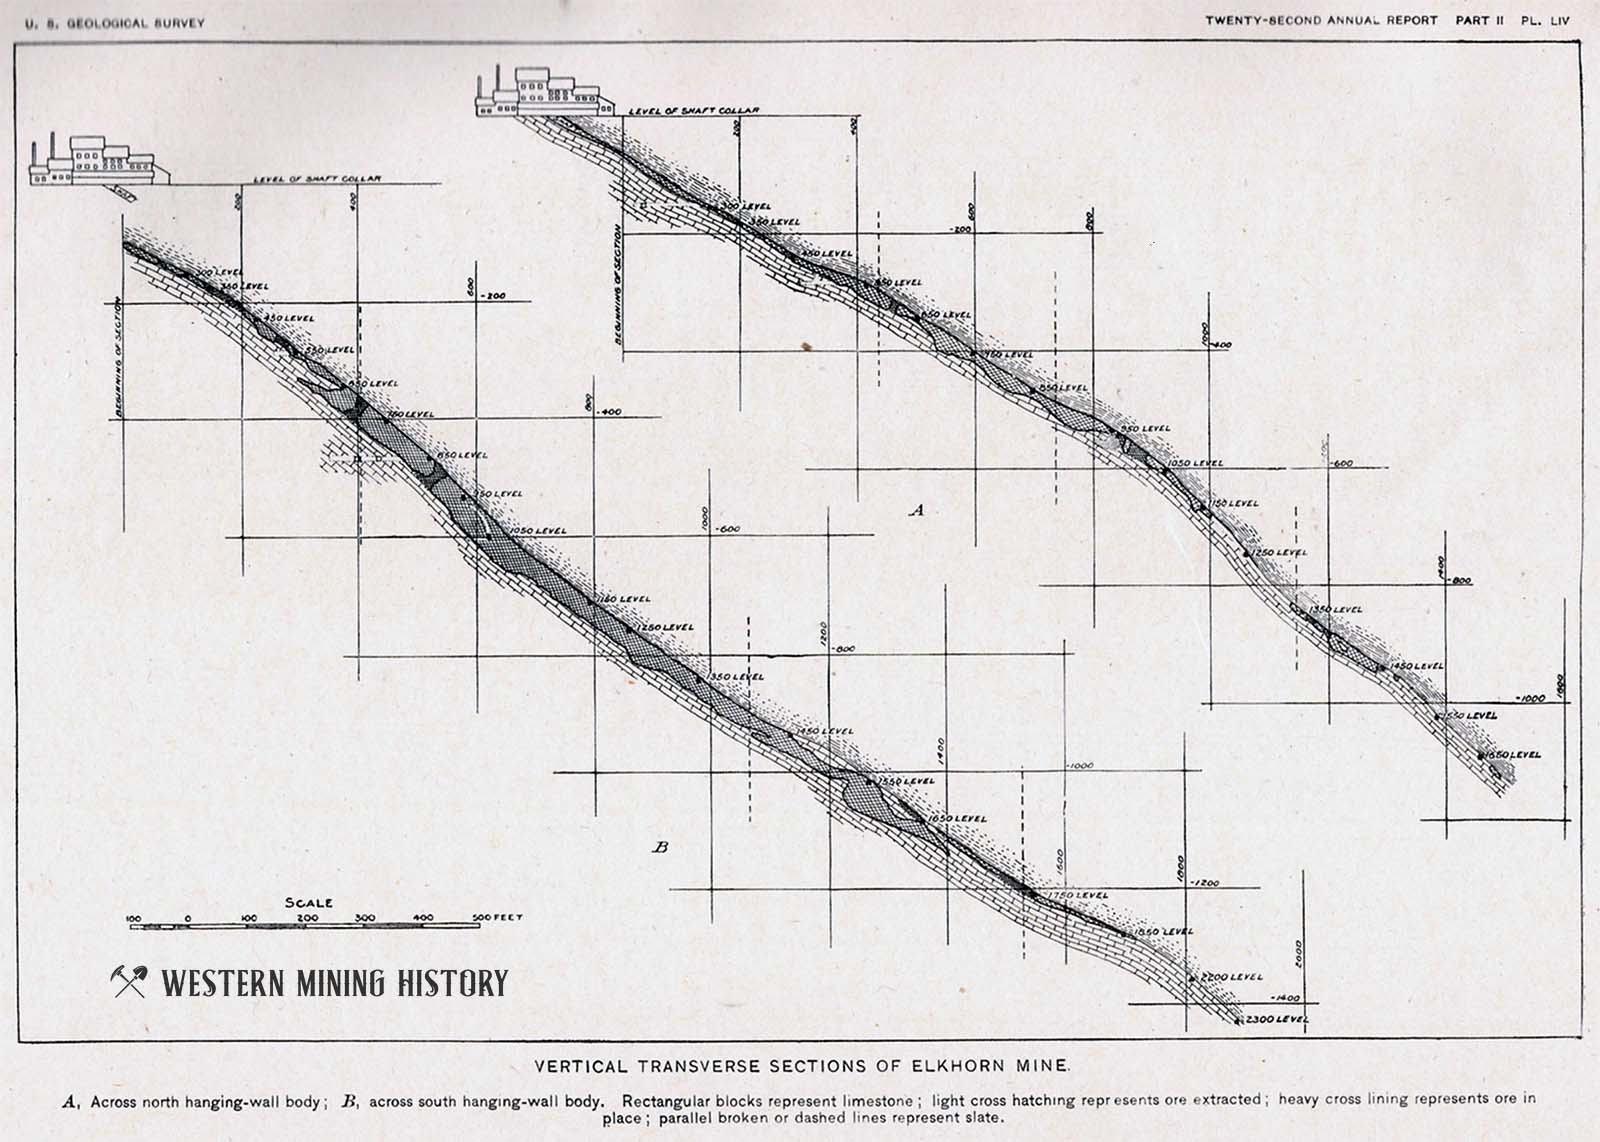 Vertical Transverse Sections of the Elkhorn Mine